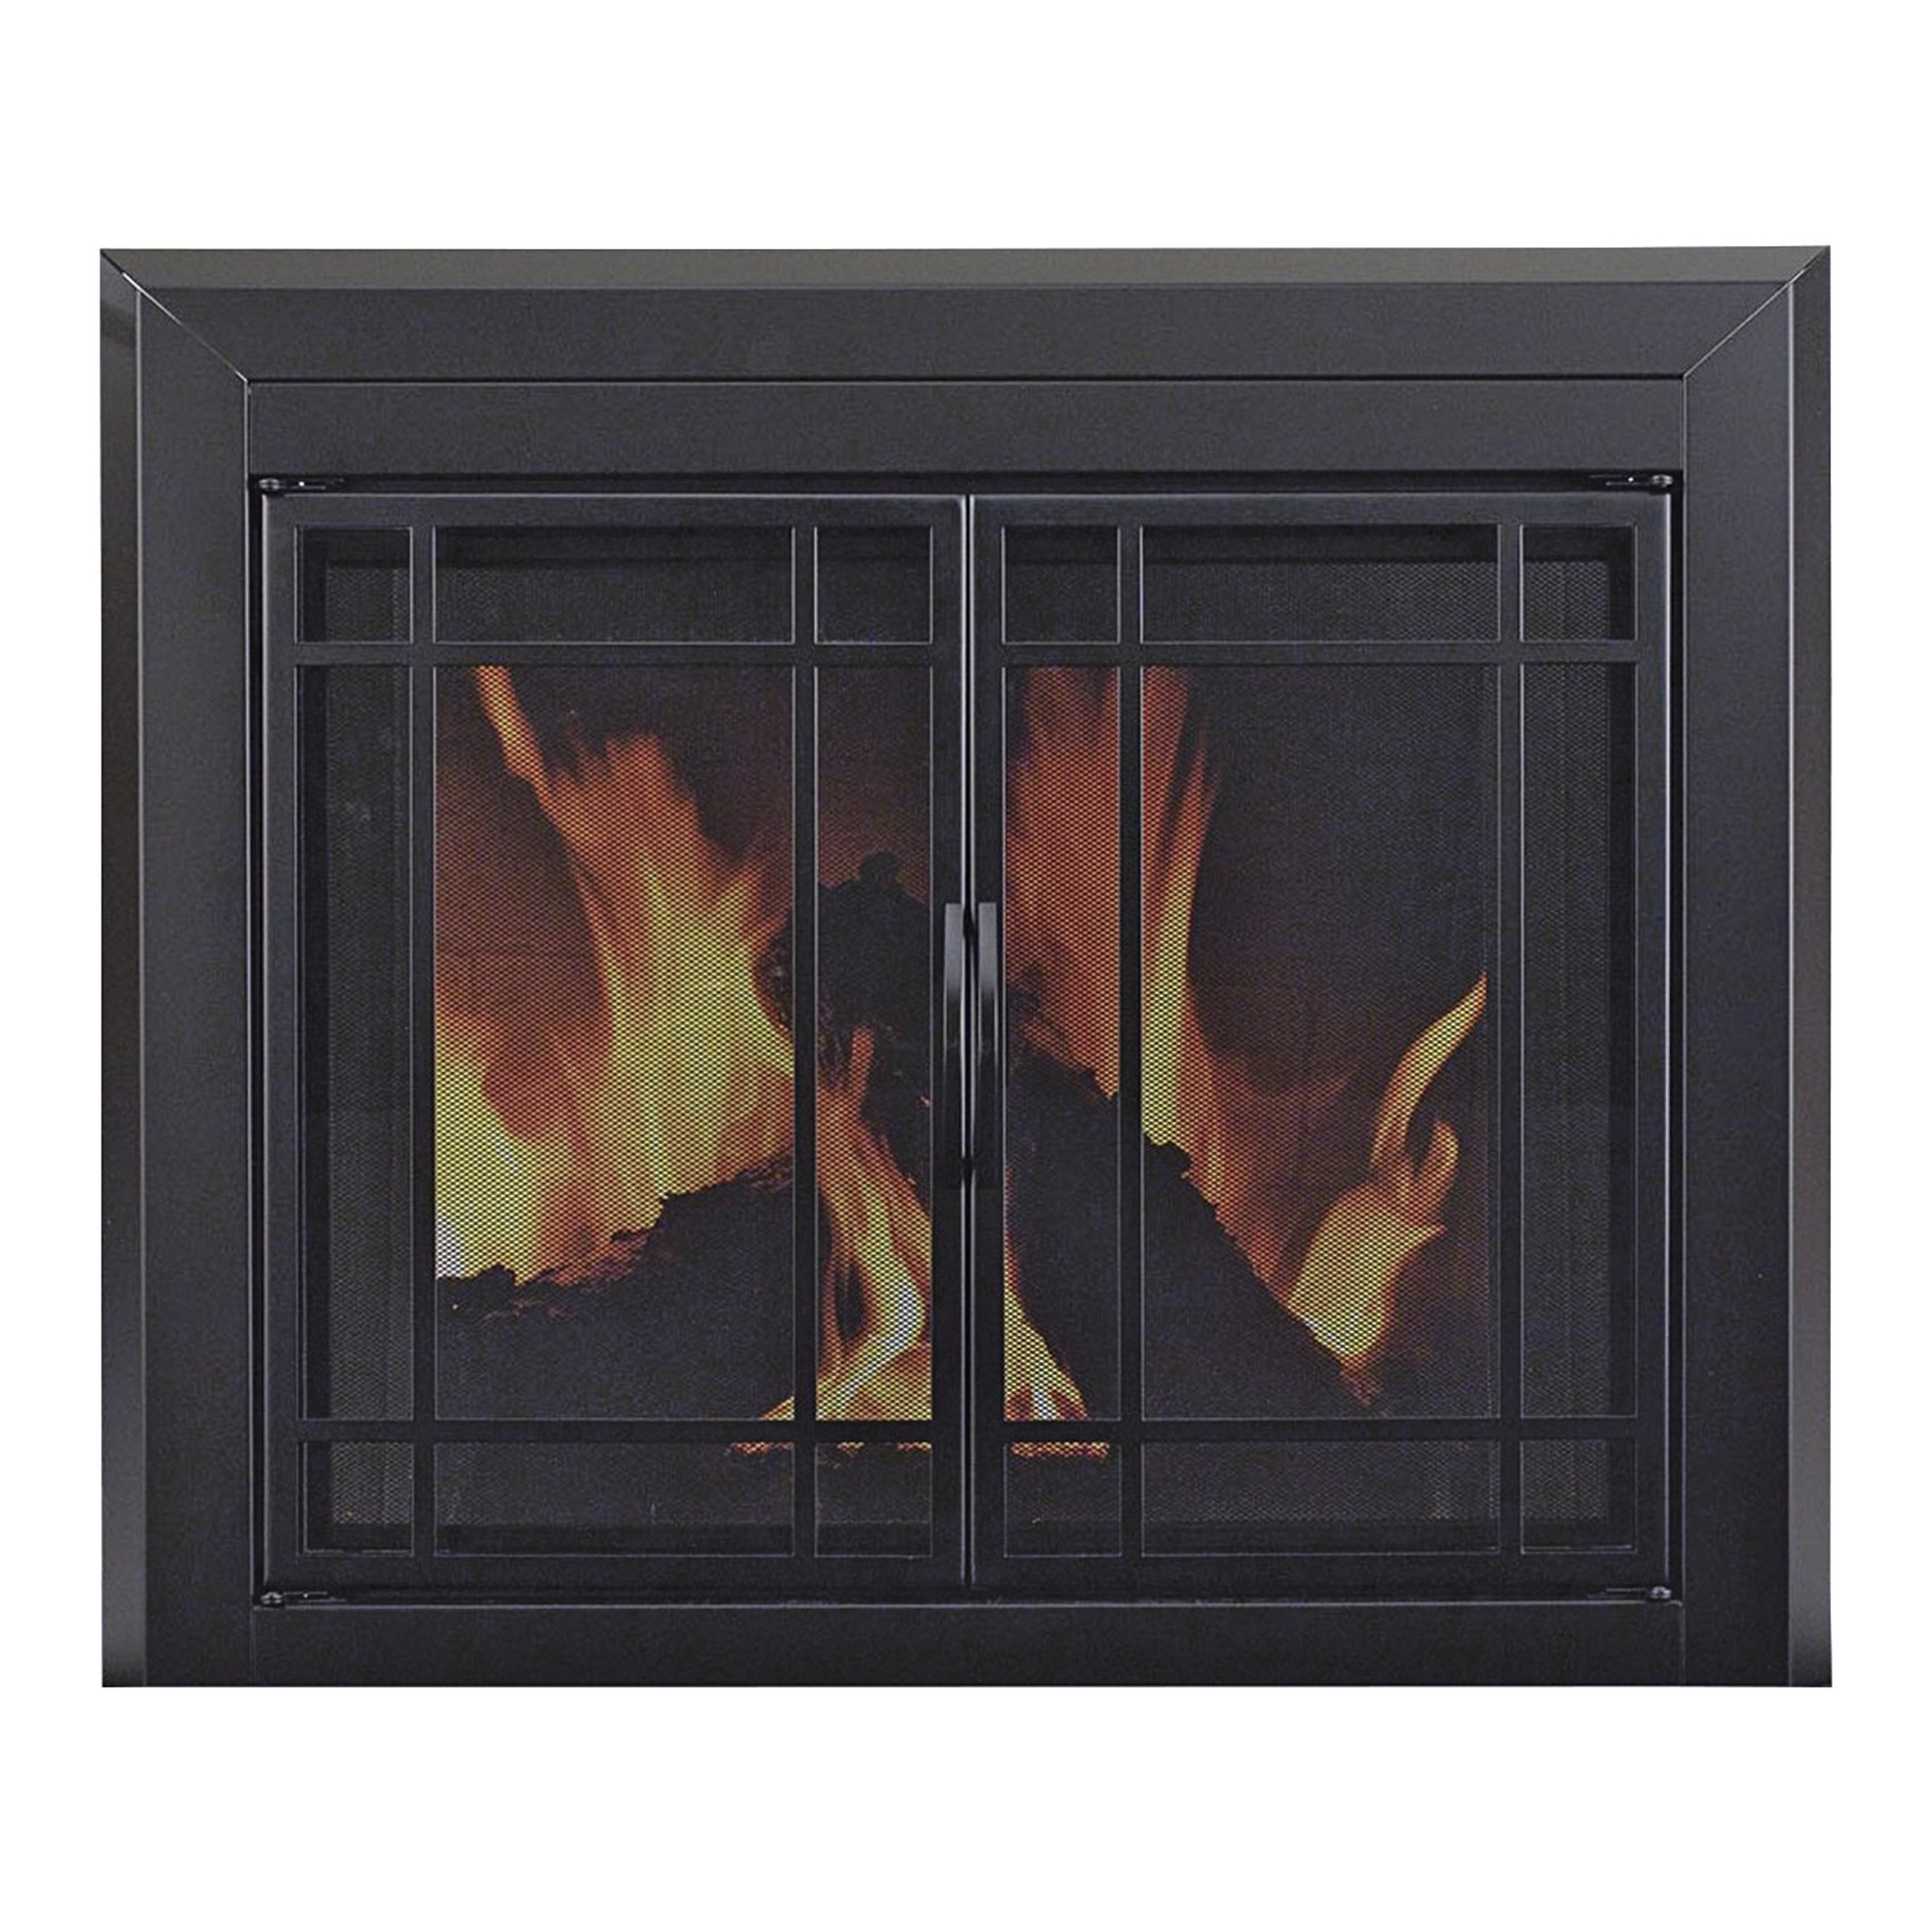 Pleasant Hearth Easton Fireplace Glass Door, For Masonry Fireplaces, Small, Midnight Black, Model EA-5010